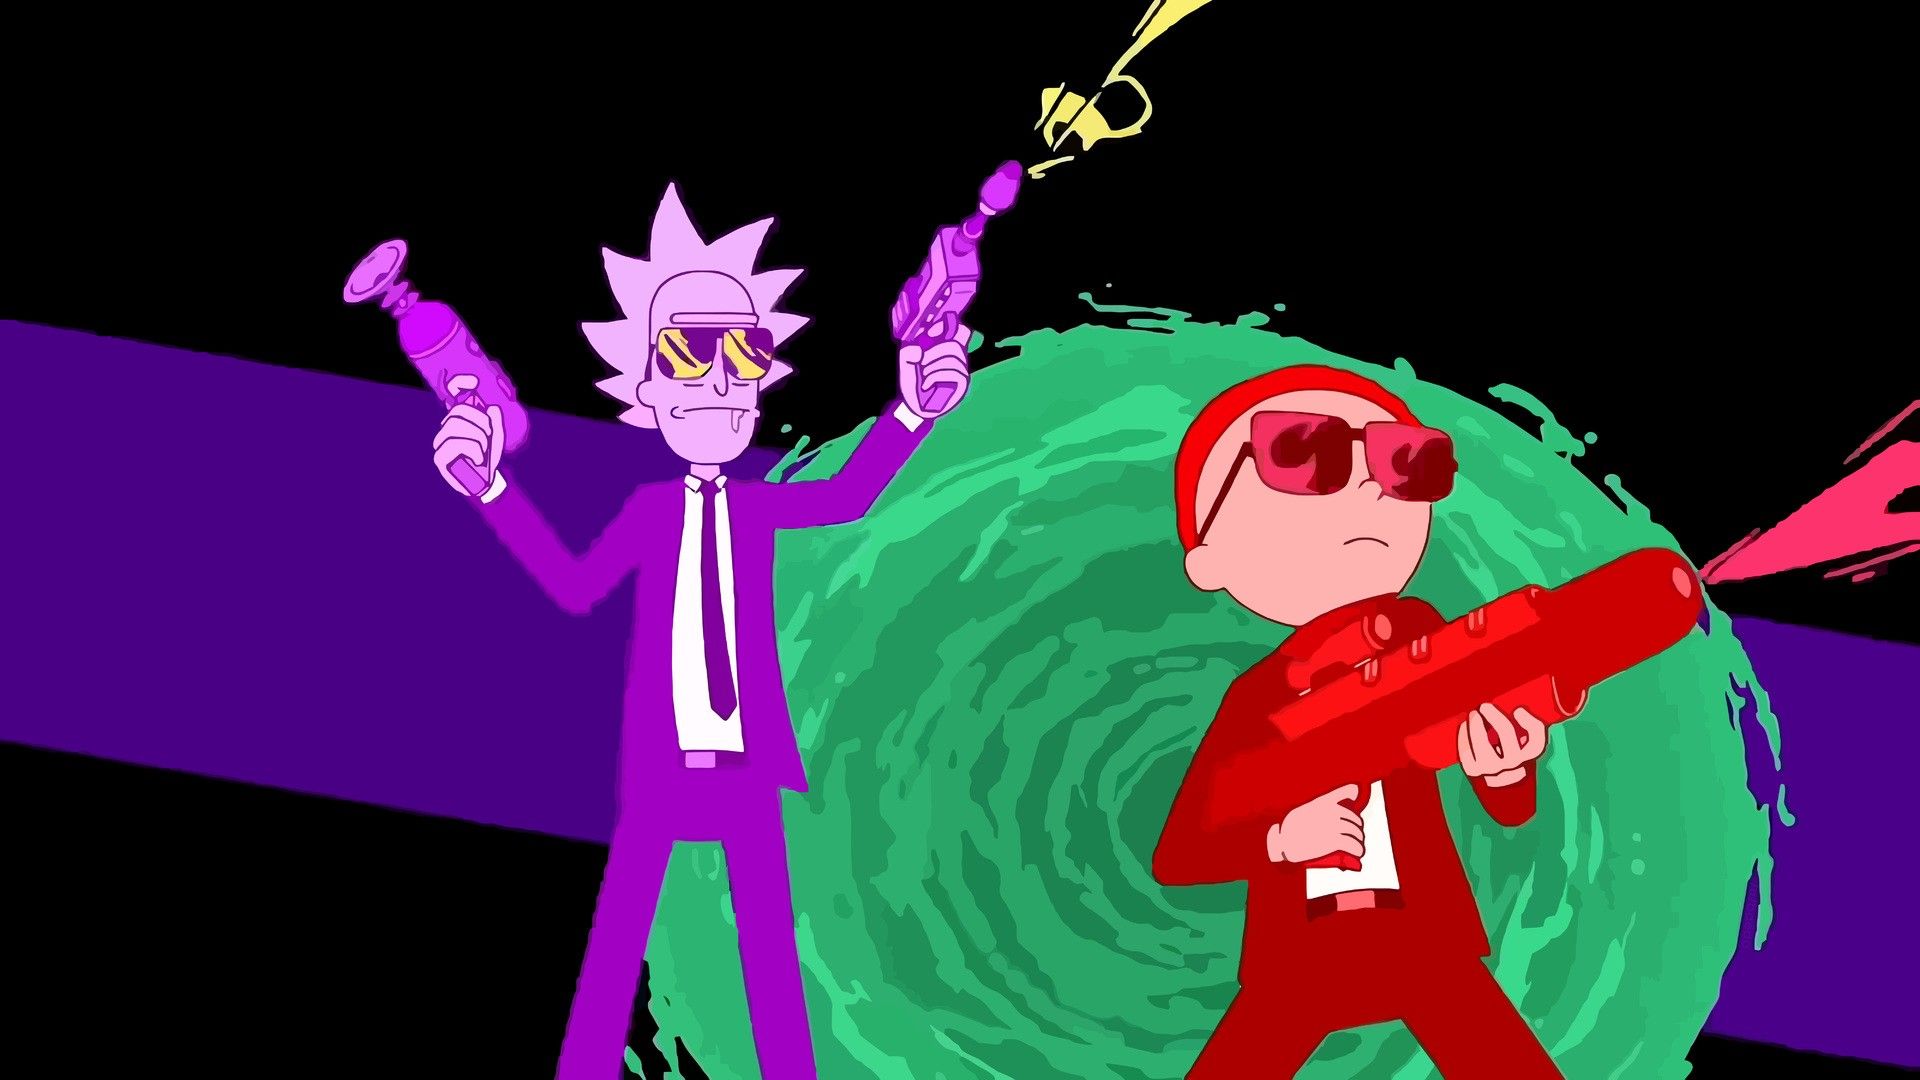 ricky and morty wallpapers hd 4k 24